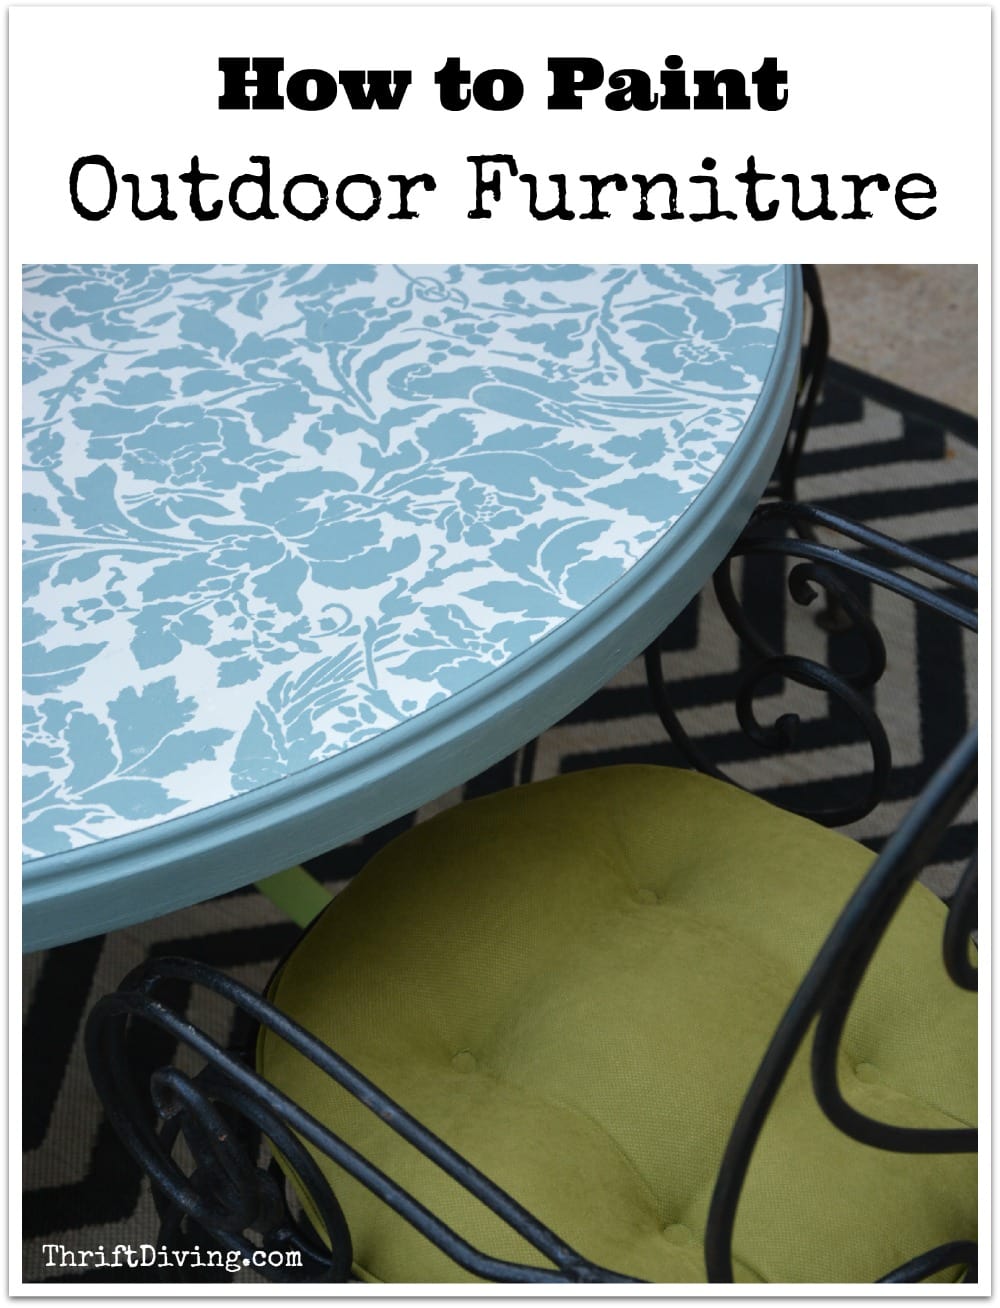 How to Paint Outdoor Furniture